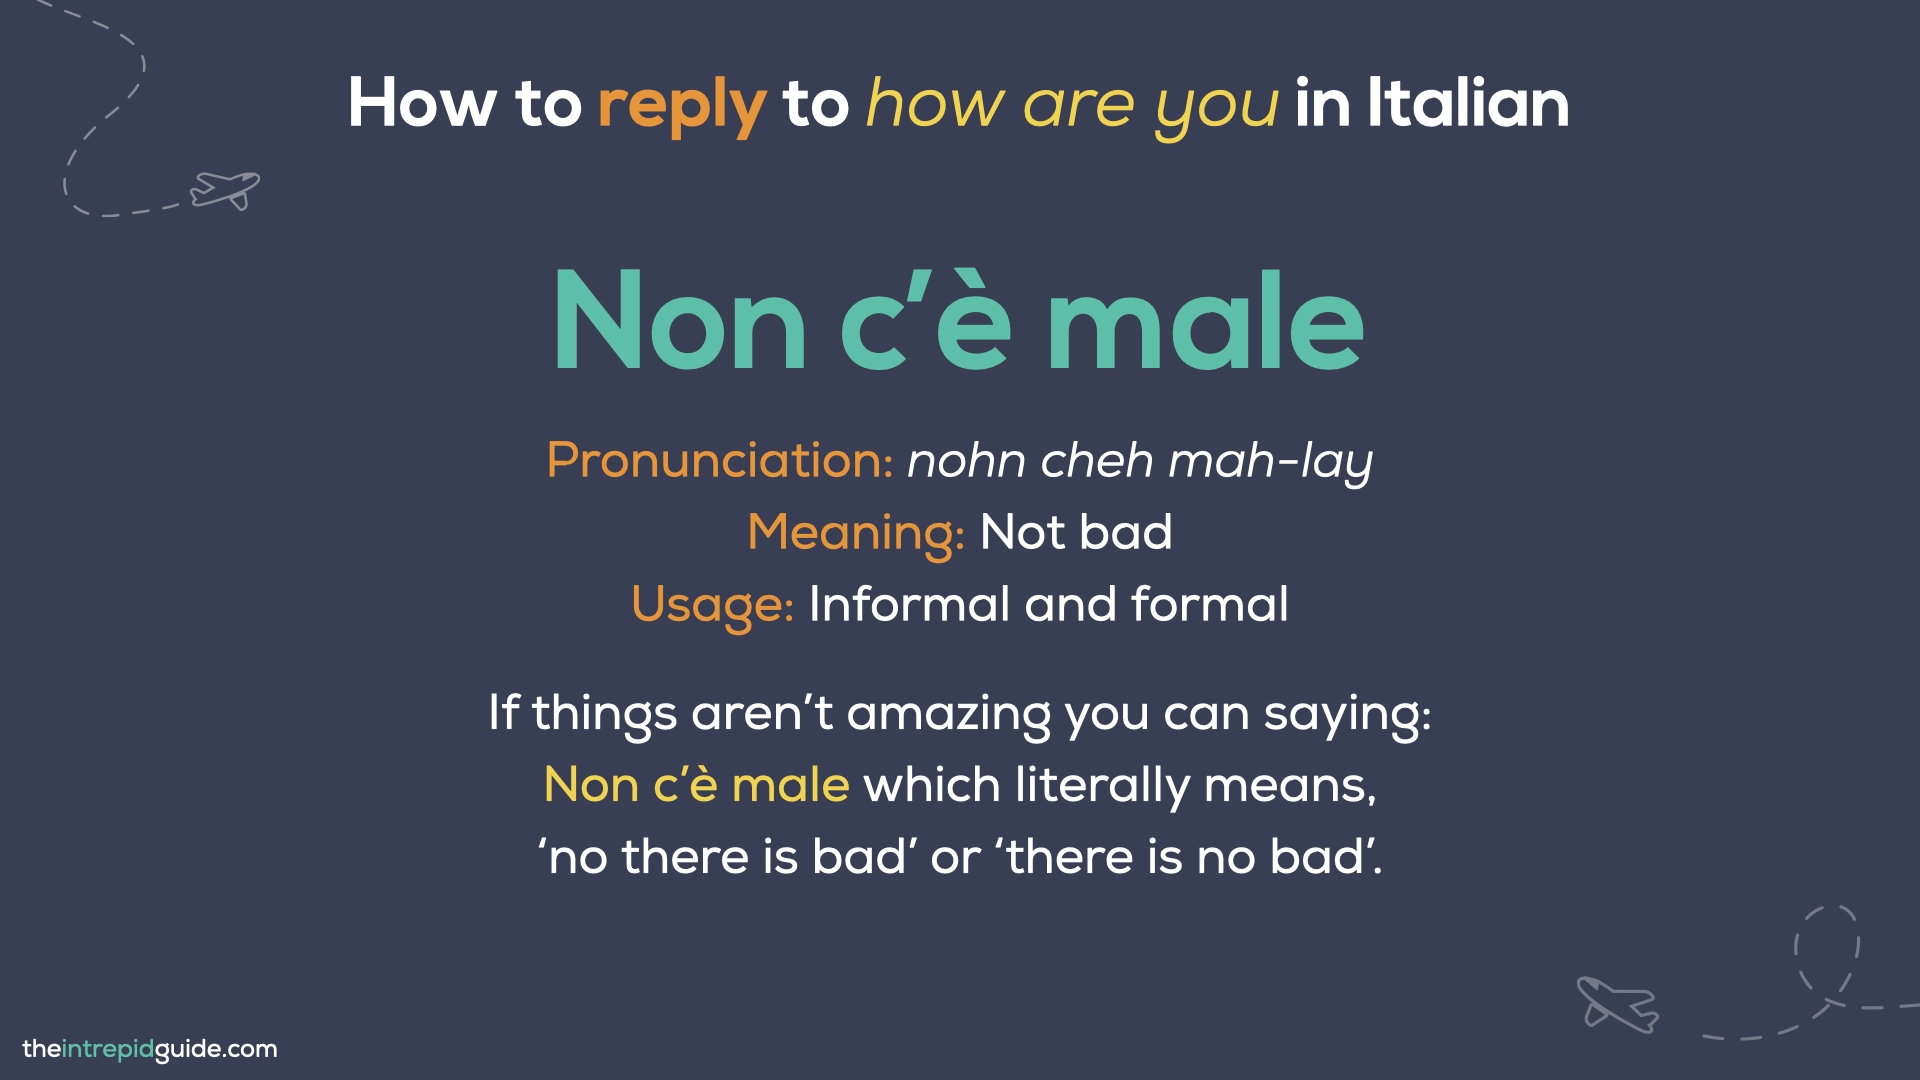 How to say How are you in Italian - Non c'è male